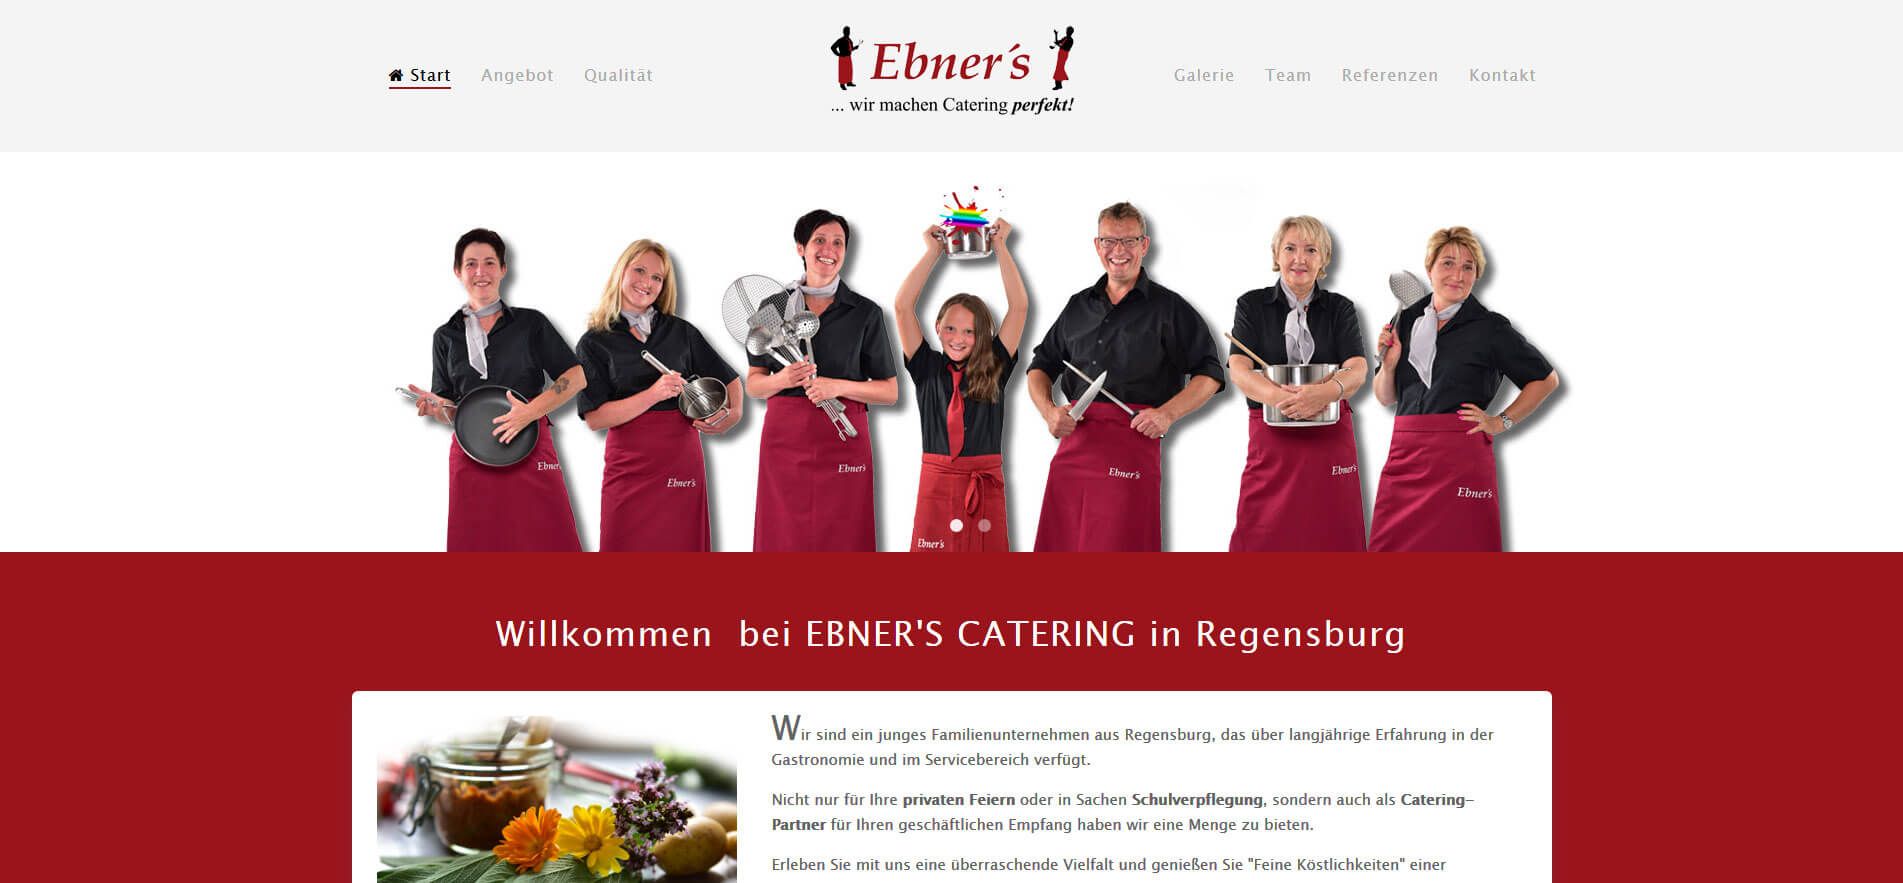 Ebners Catering